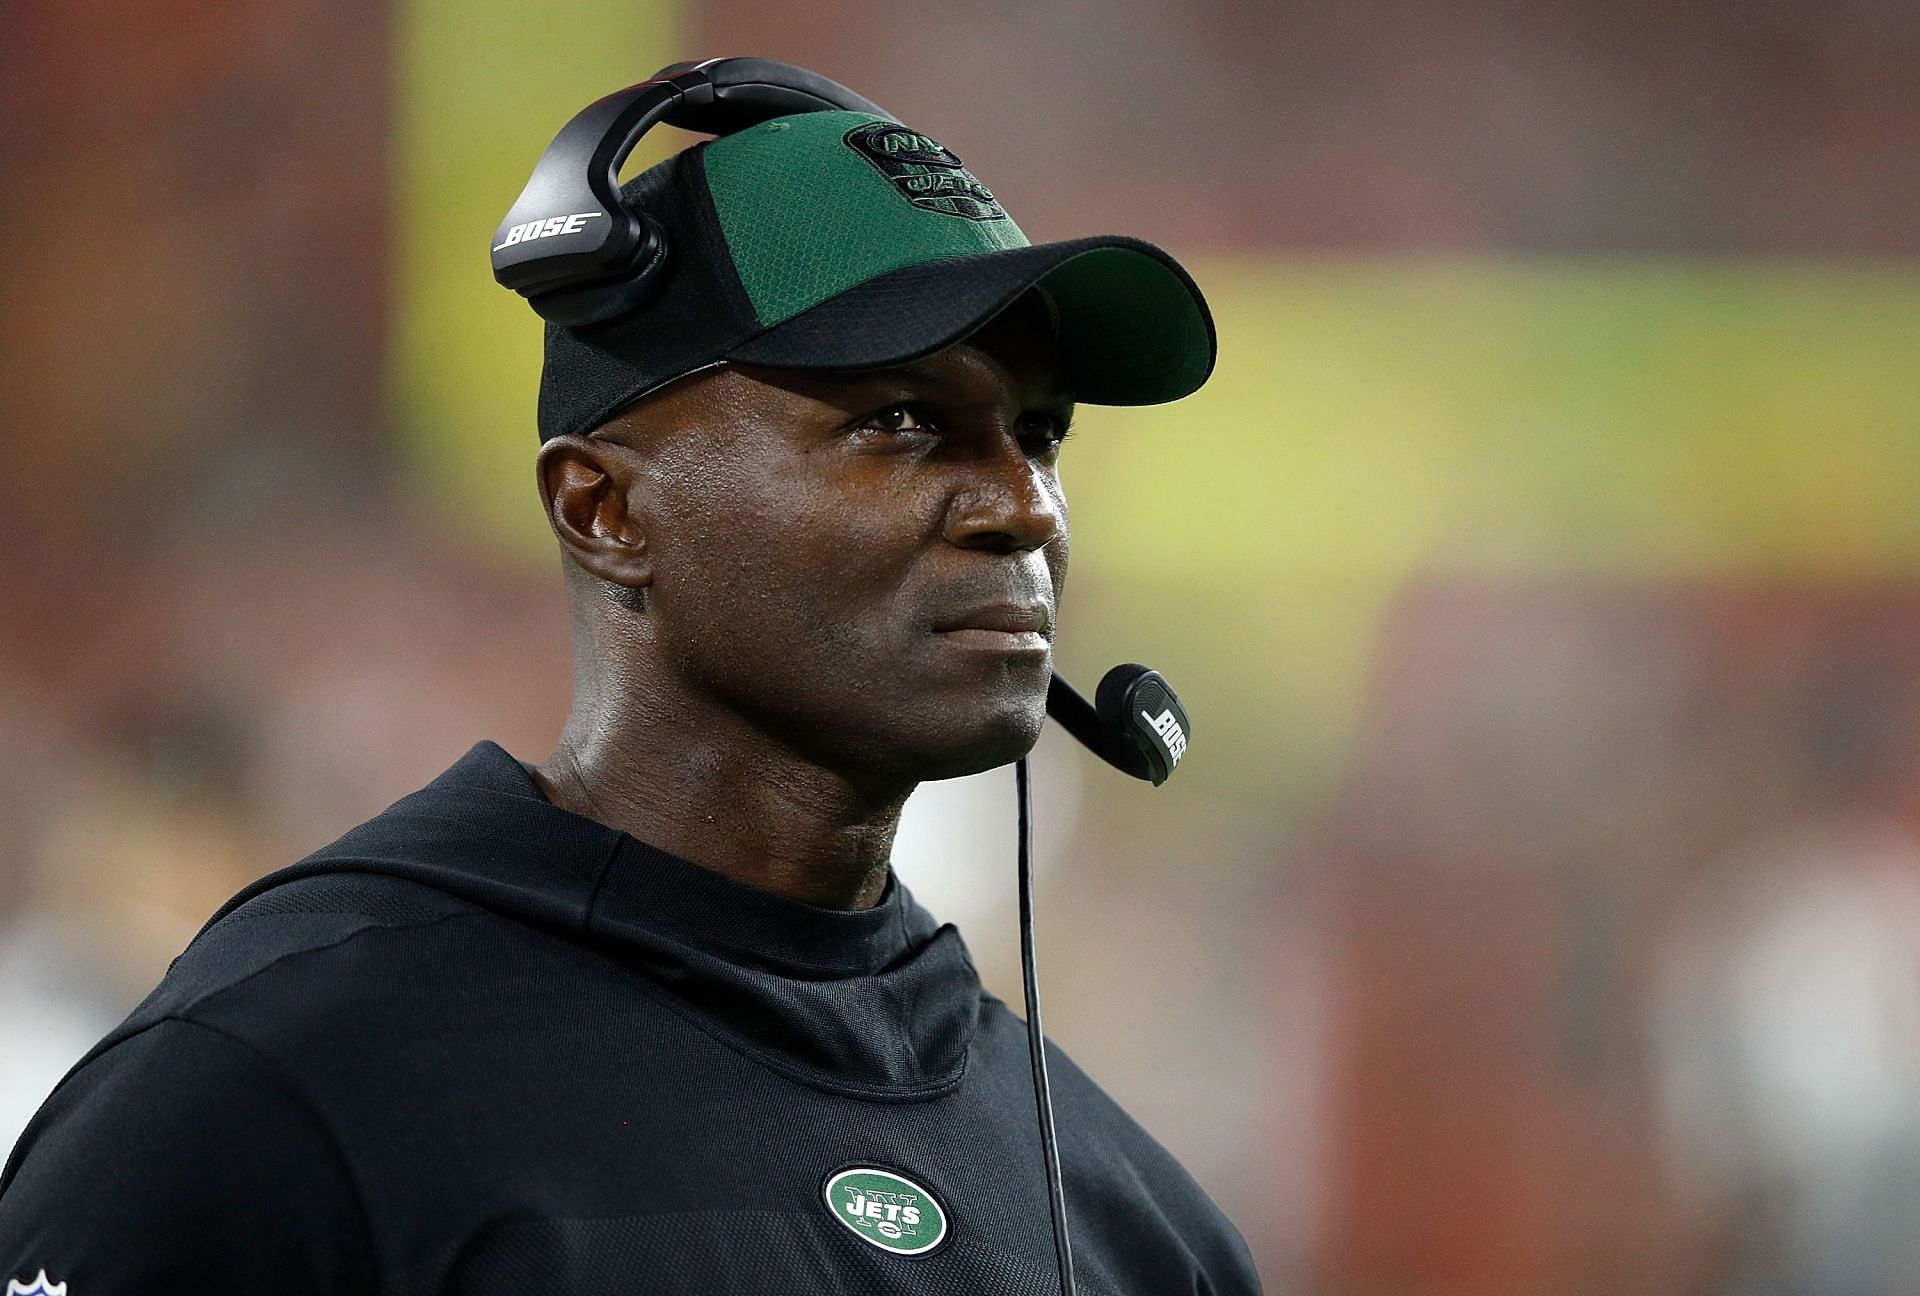 New York Jets head coach Todd Bowles